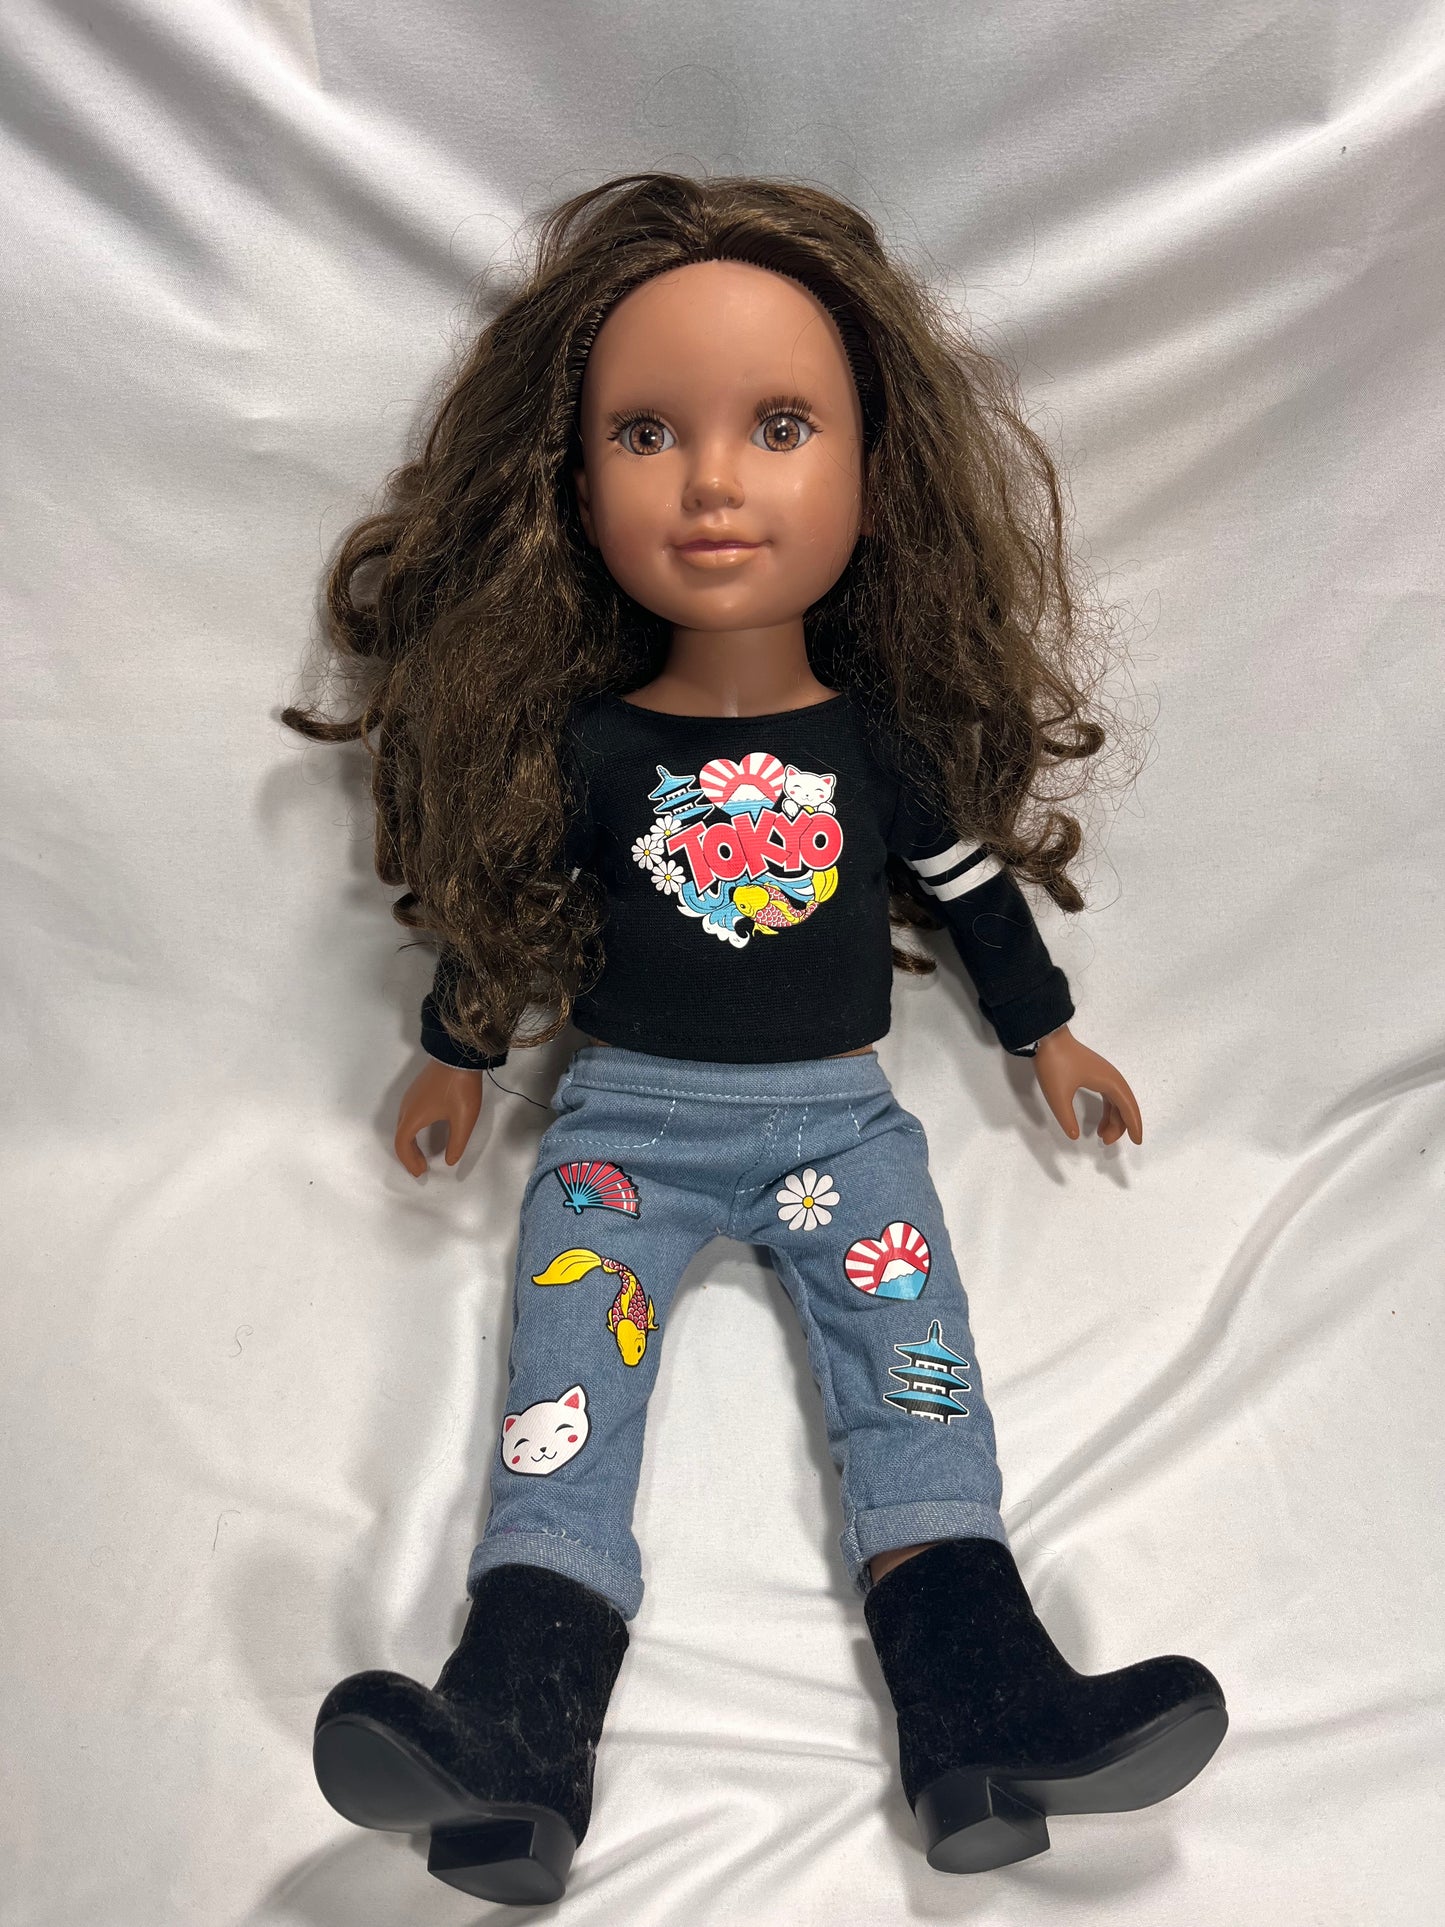 18” doll with complete outfit Kyla